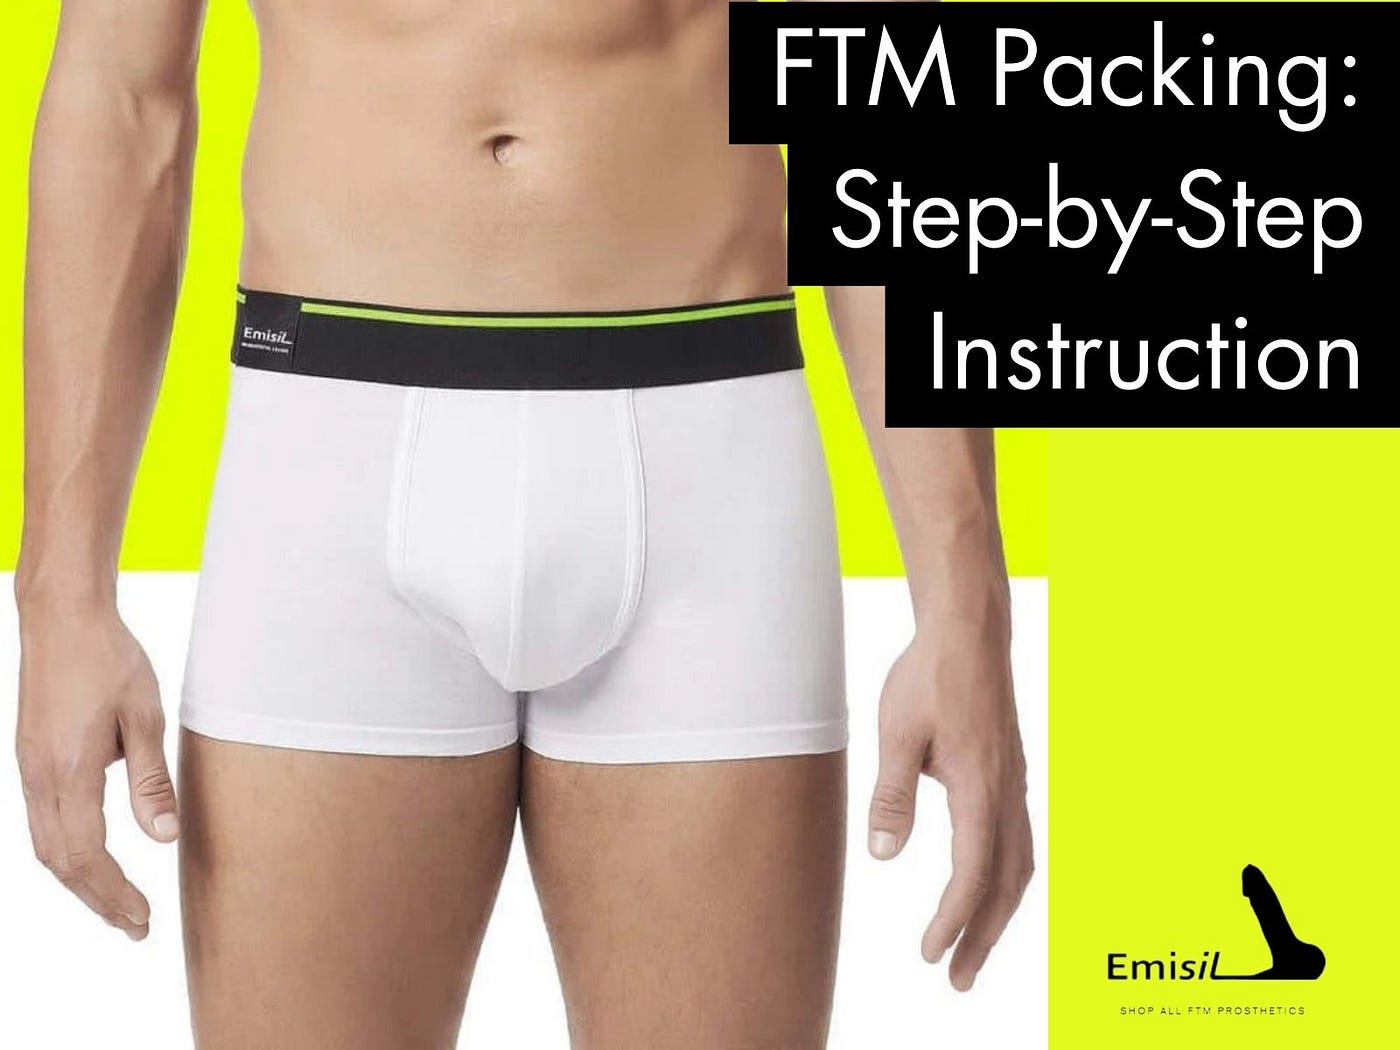 Emisil's Boxers and FTM Packing: A Step-by-Step Instruction, by Emisil